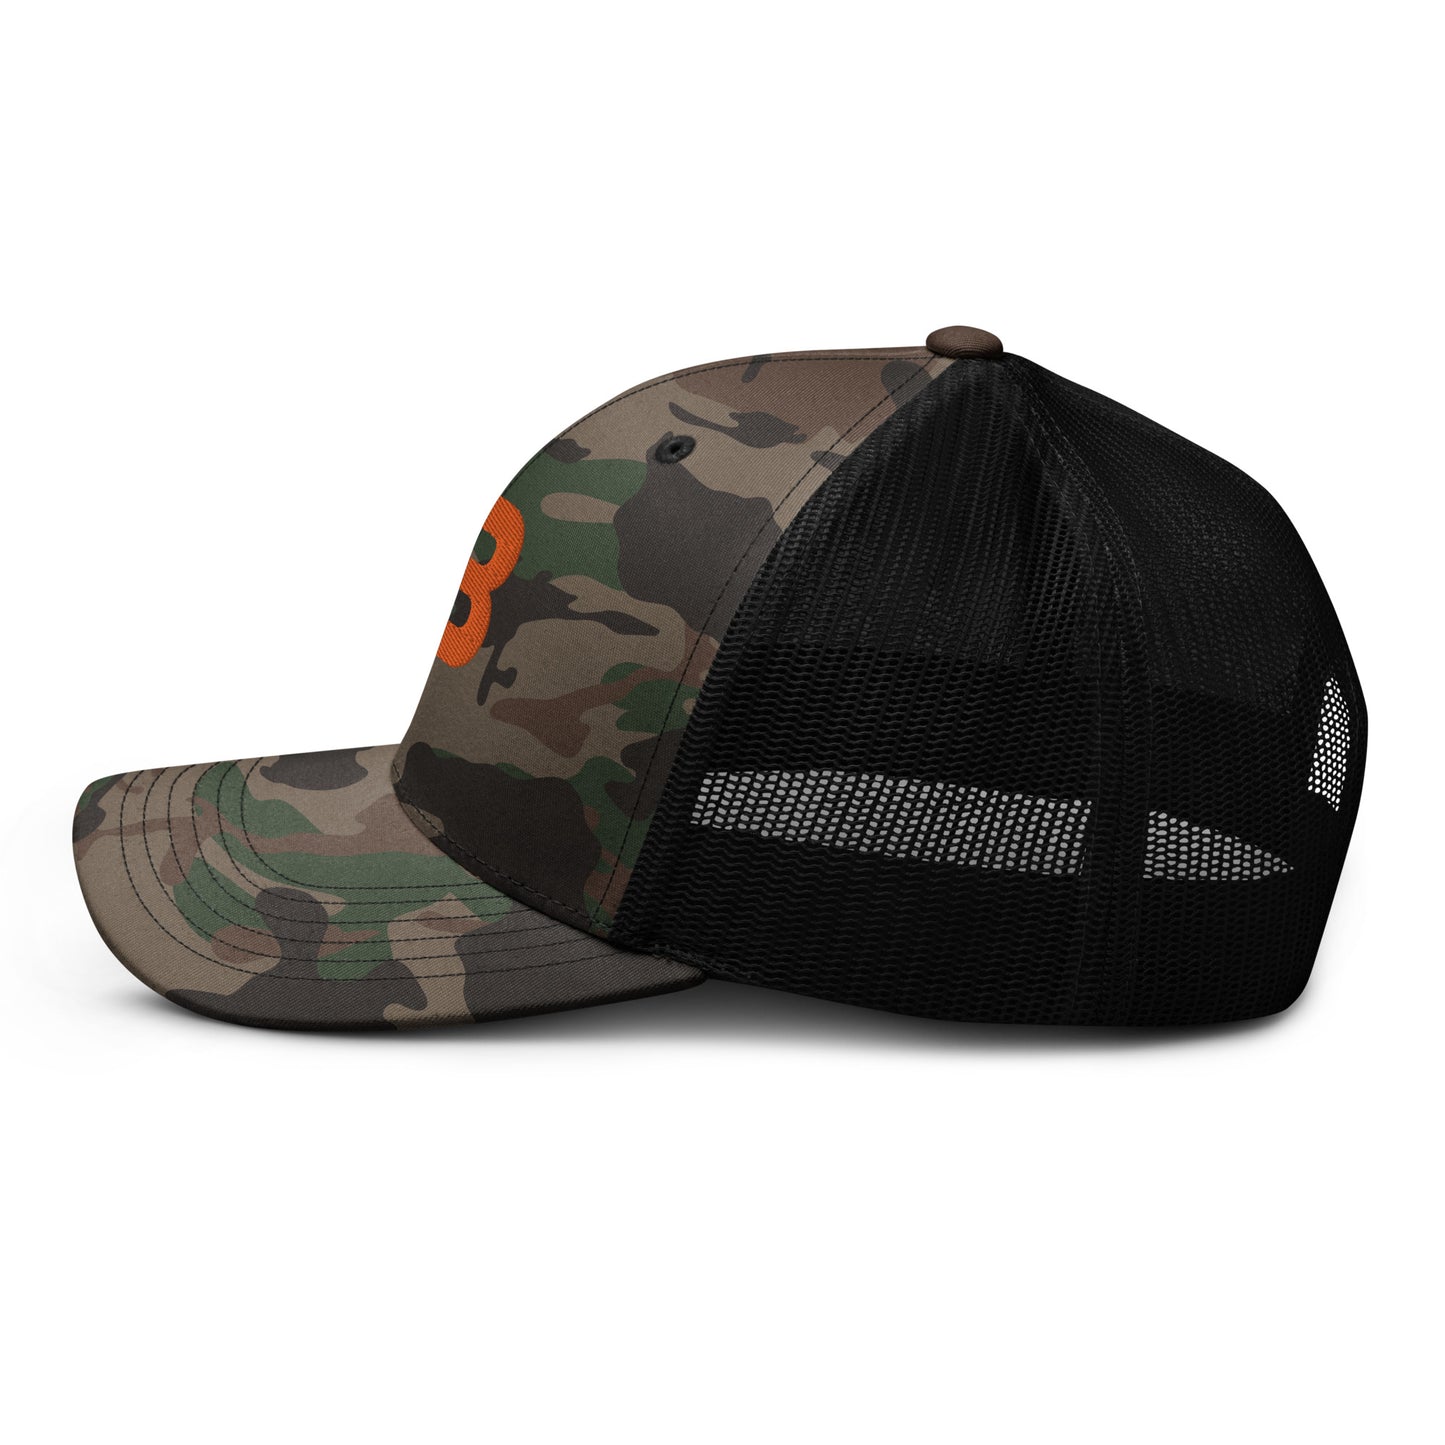 Limited Edition Bomber Camouflage trucker hat